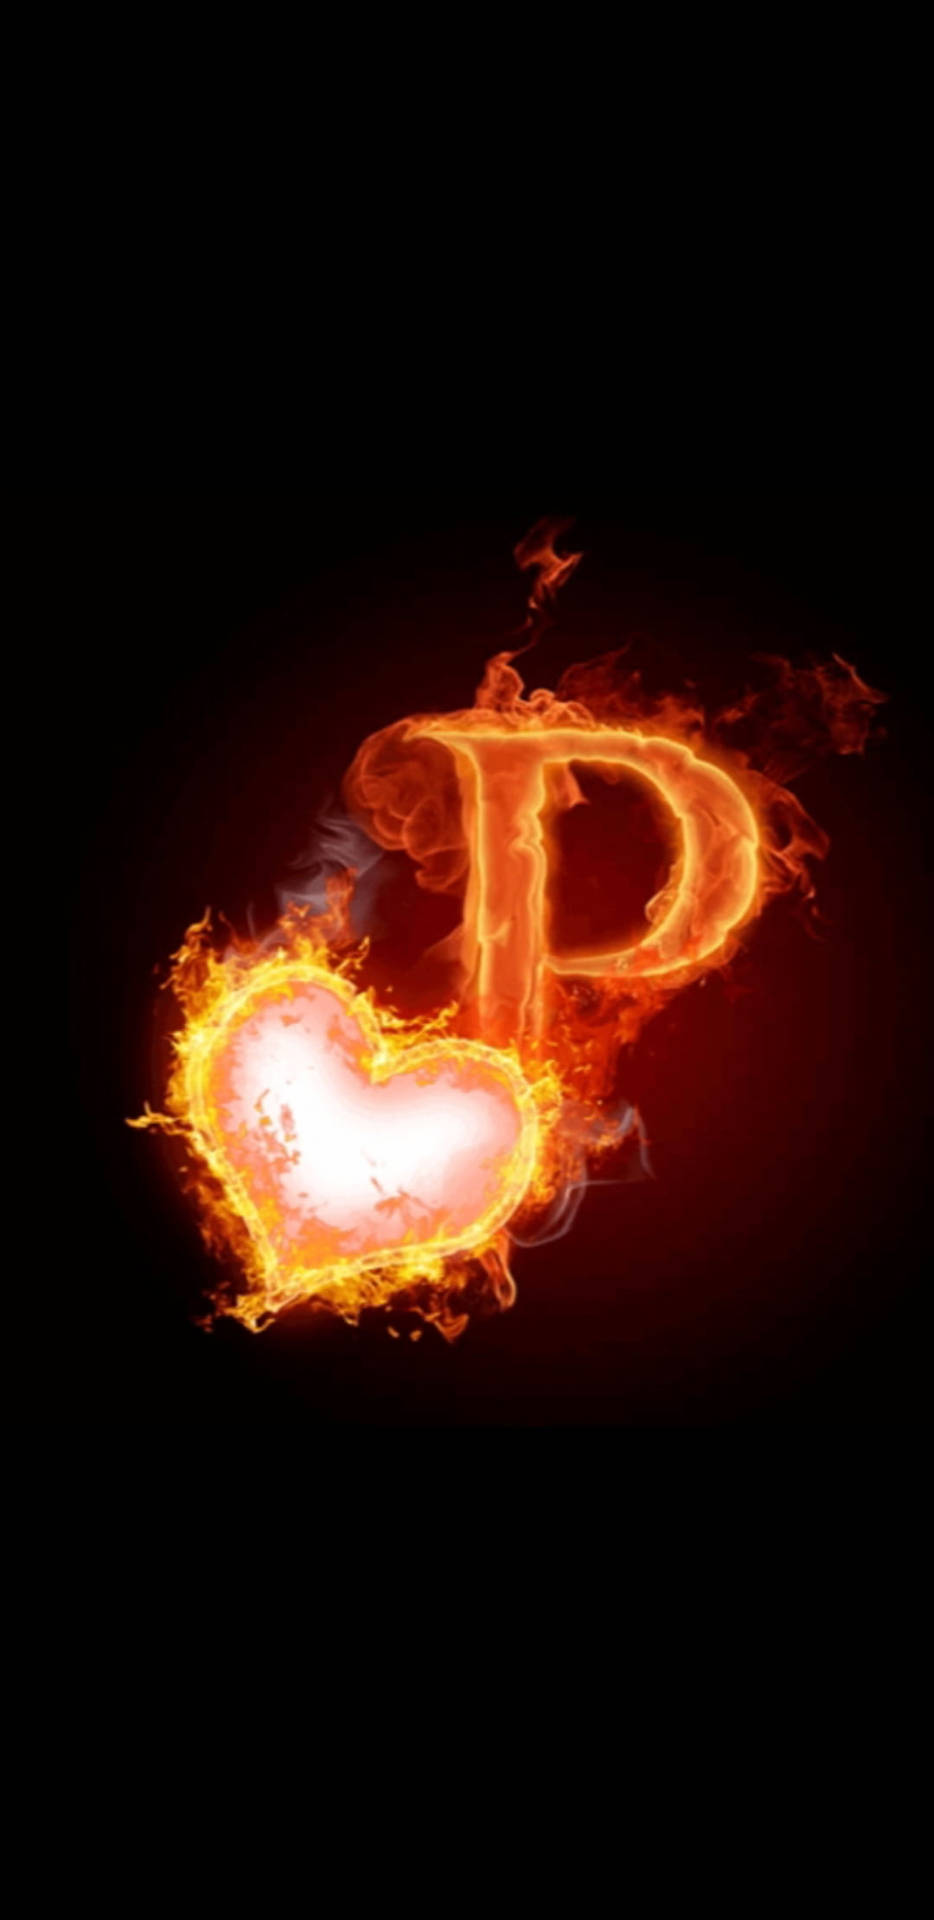 P Letter And Burning Heart Background